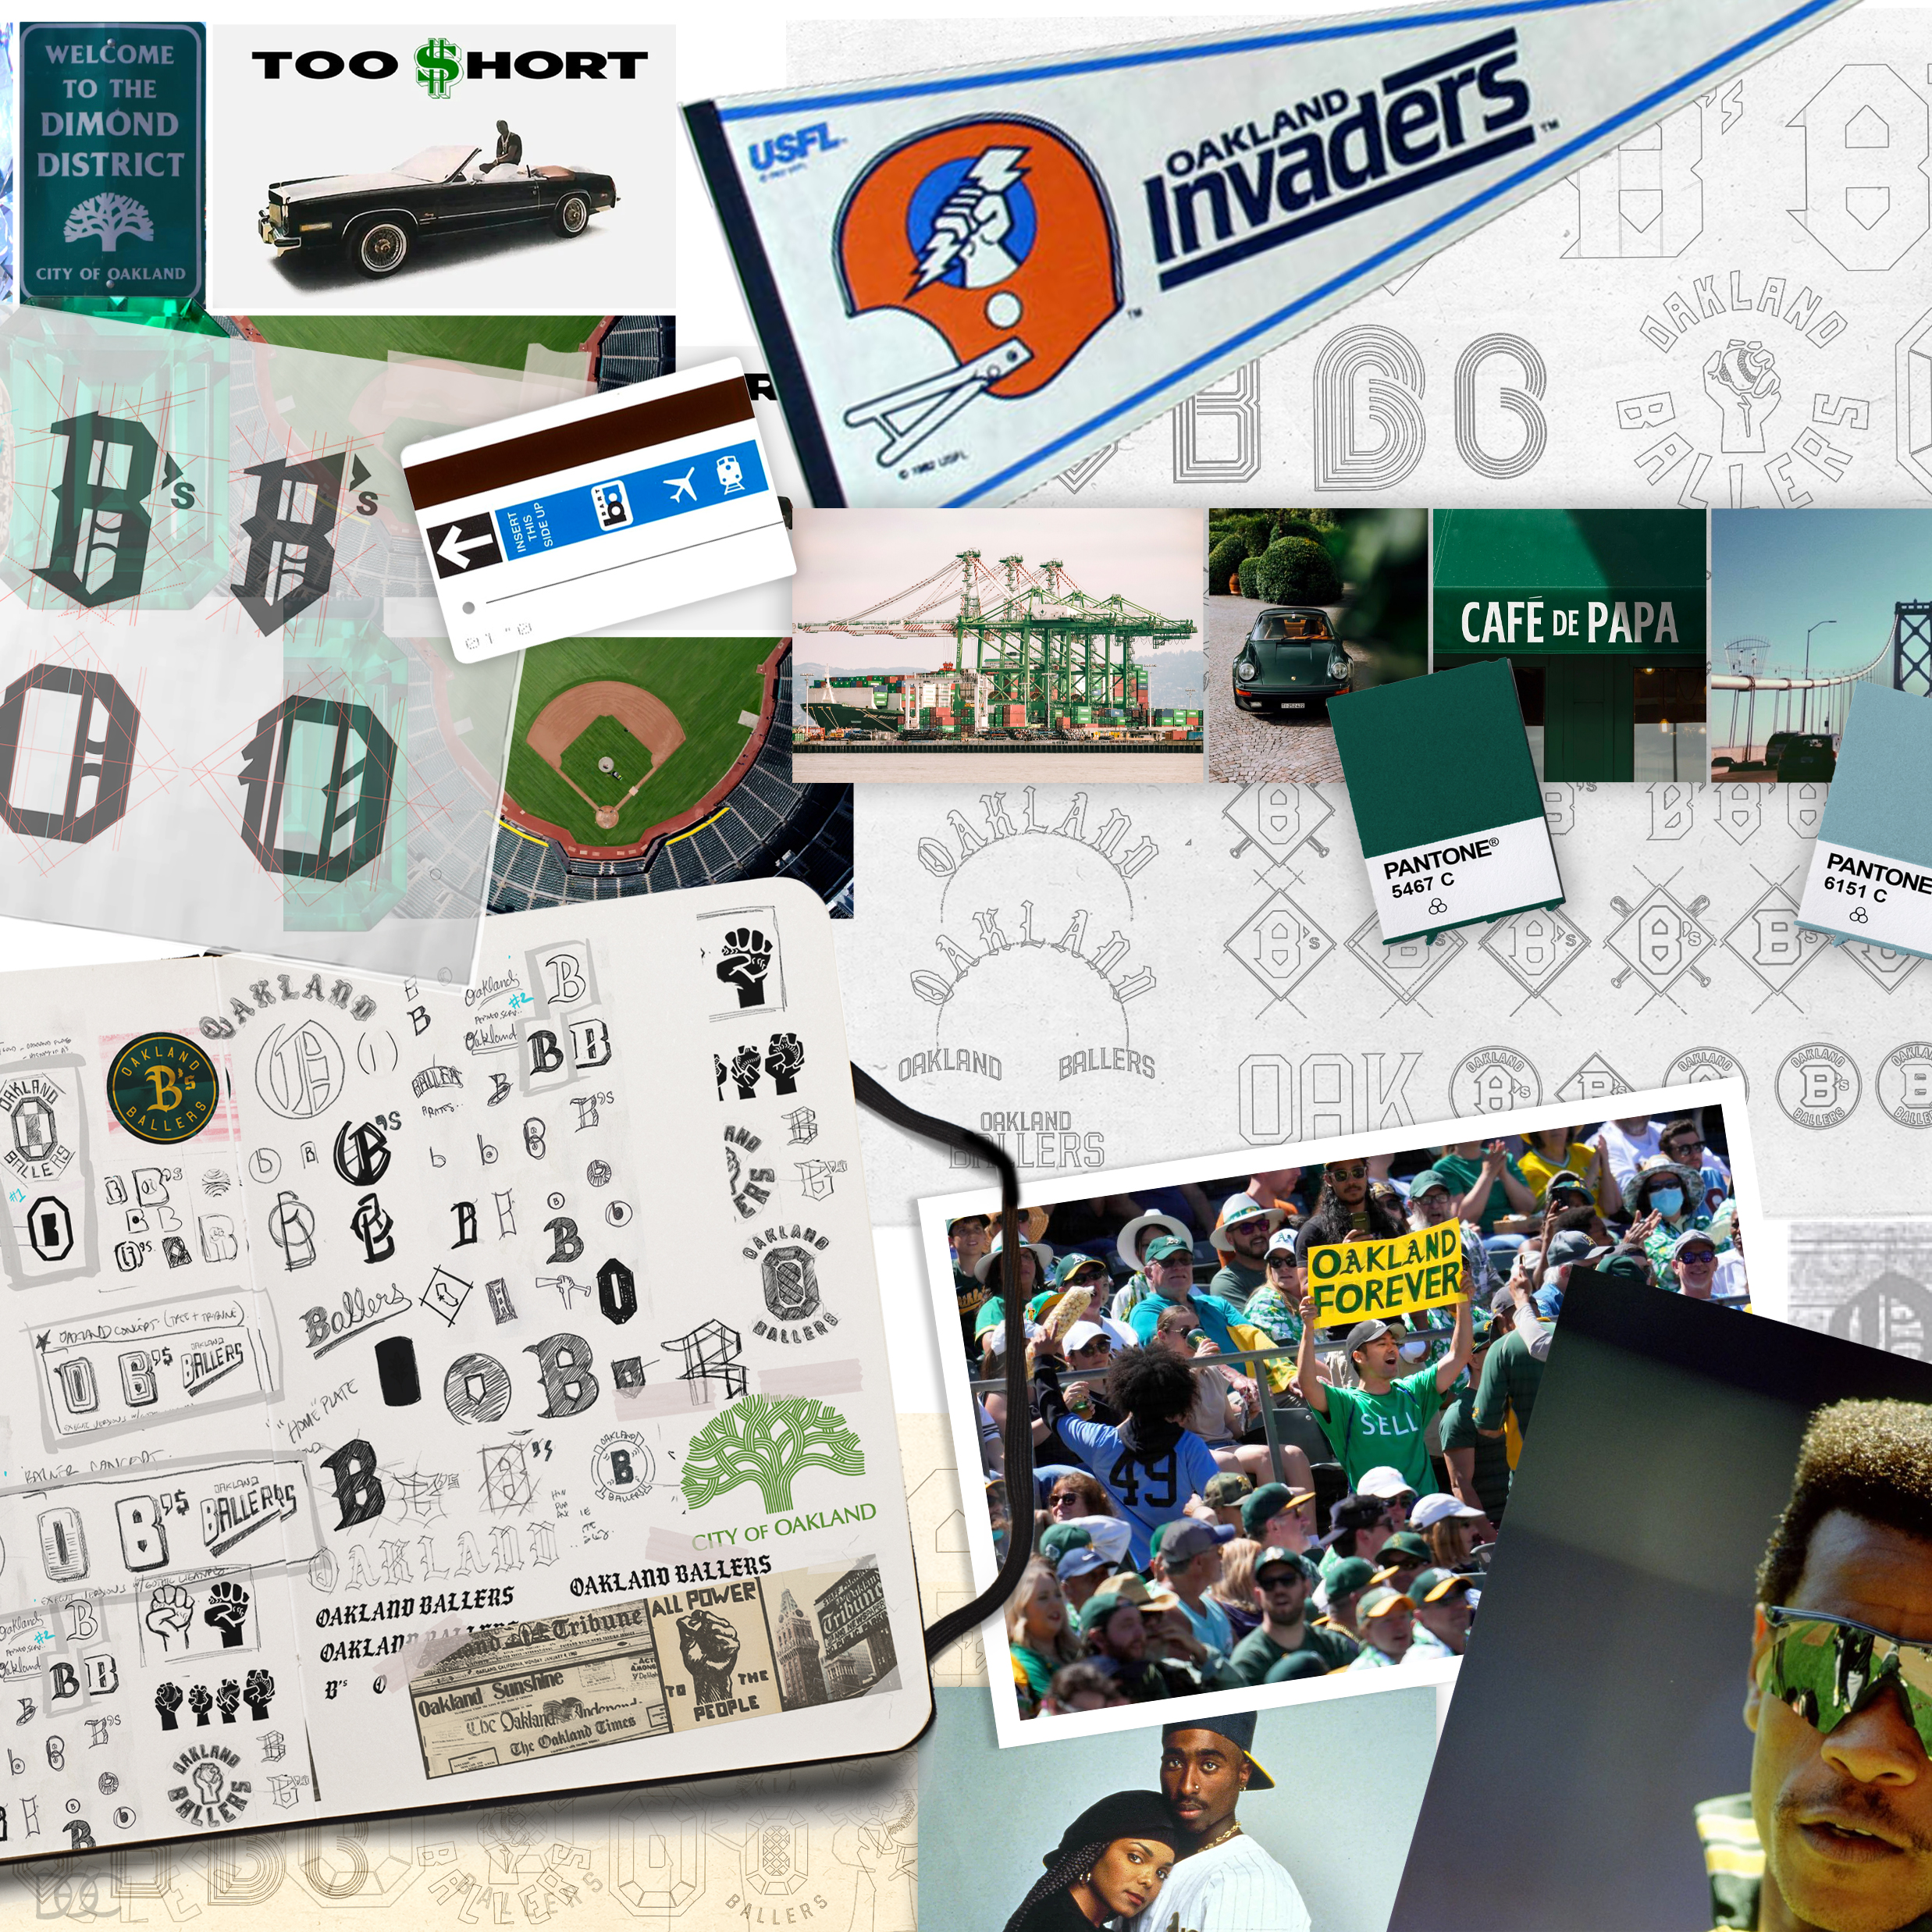 a designer's mood board for the Oakland Ballers, a new minor league baseball team inspired by local iconography